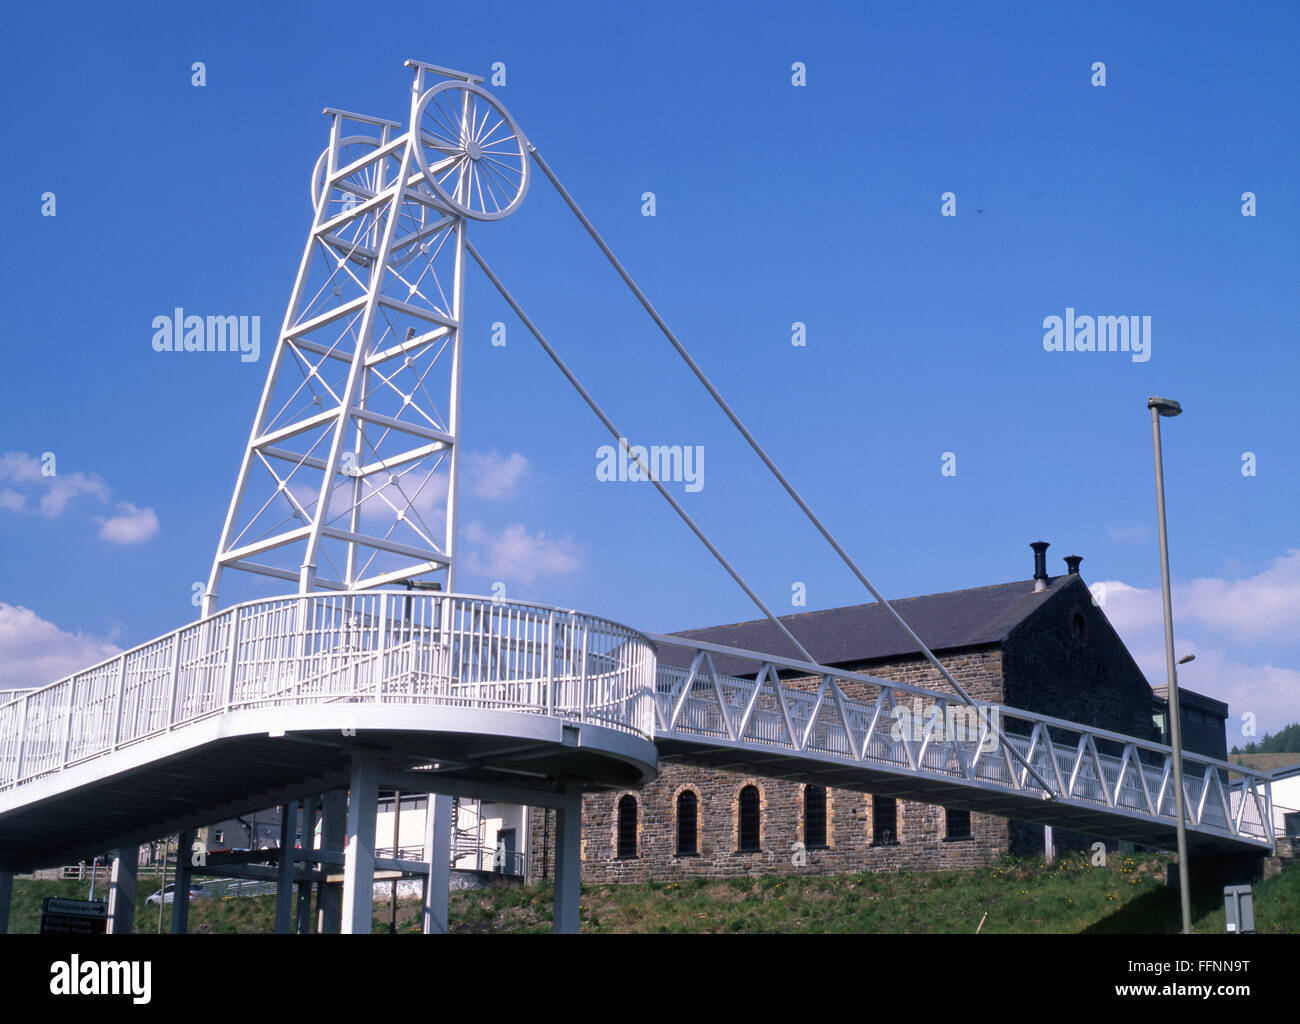 New Tredegar footbridge in style of mine pithead leading to Elliot Colliery Winding House Museum Caerphilly South Wales UK Stock Photo